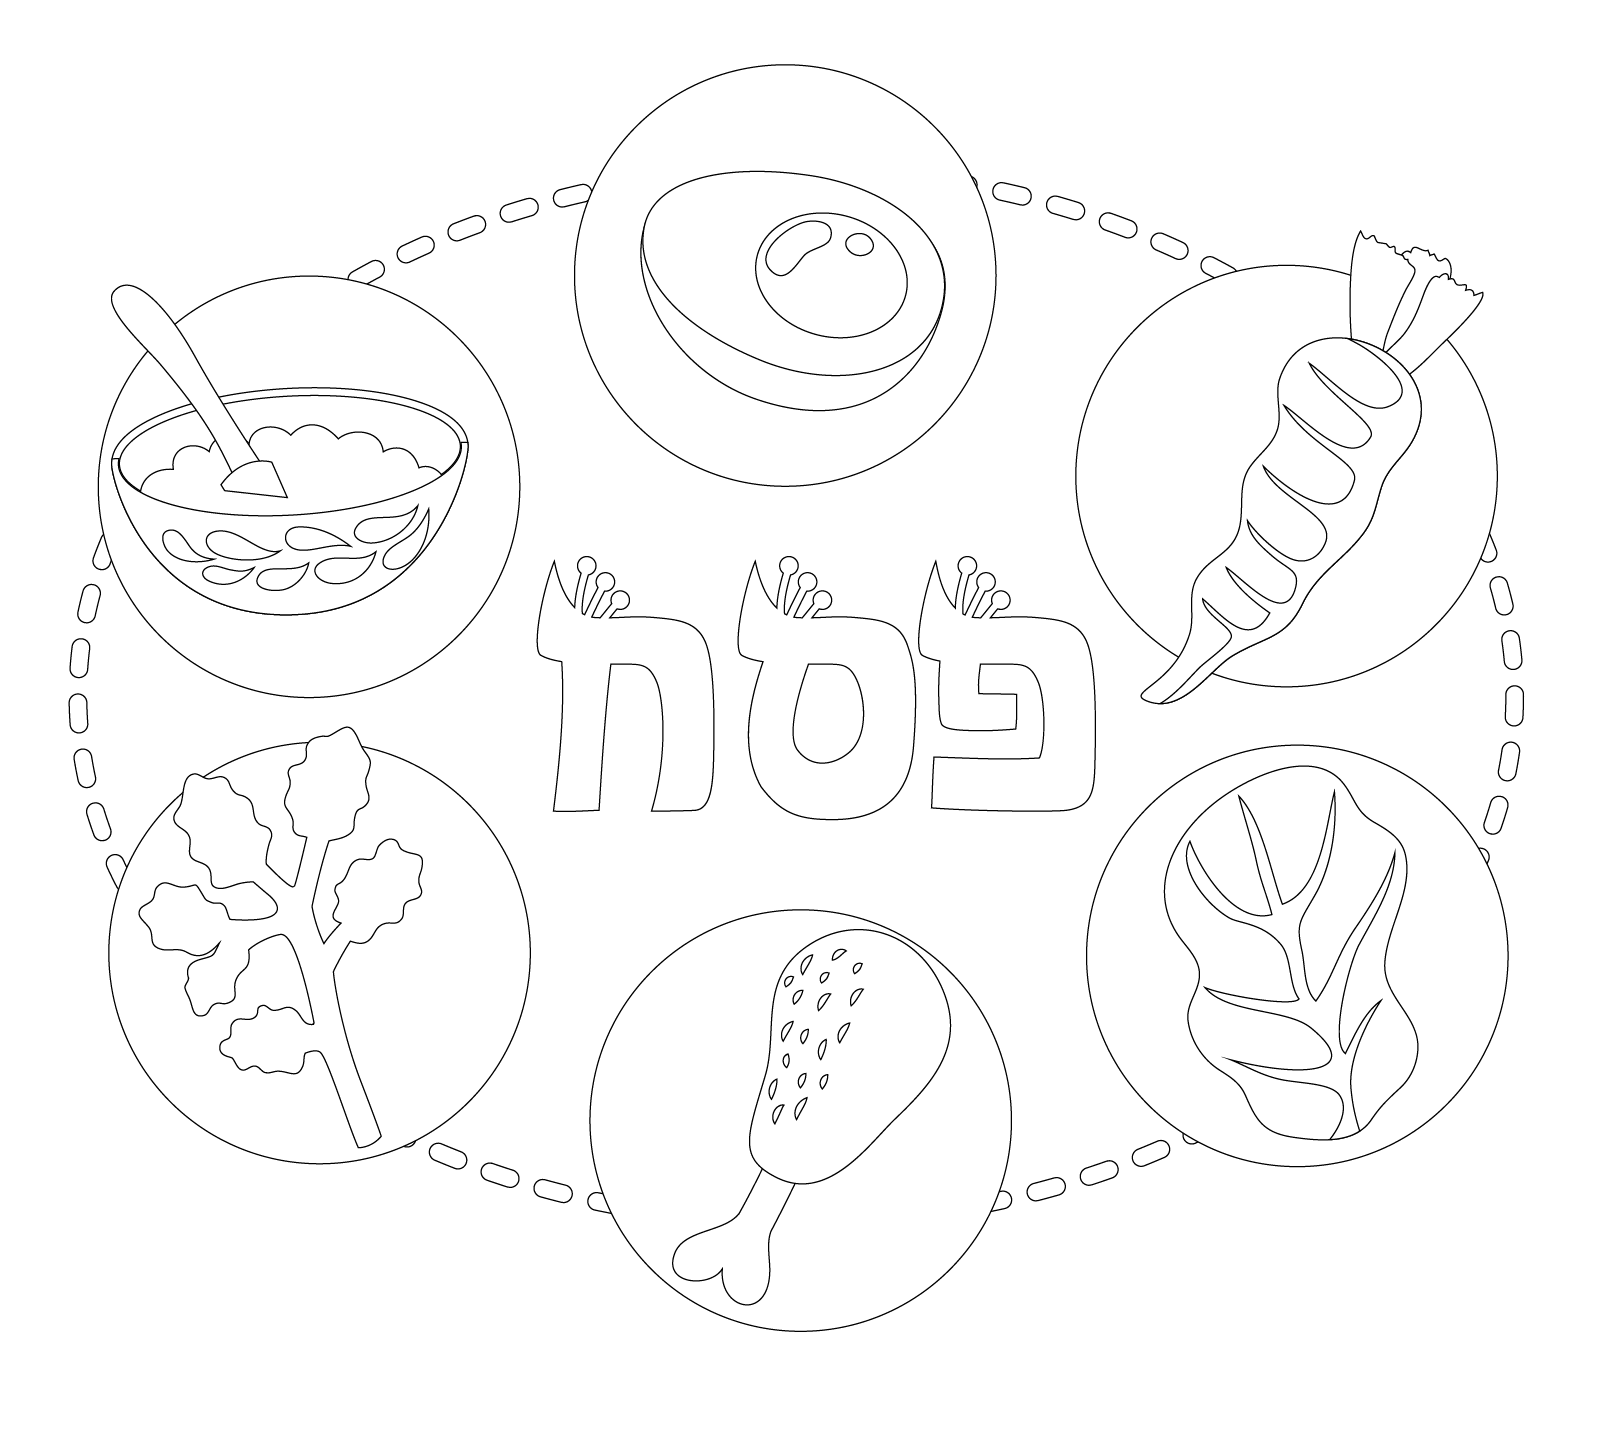 The Seder Plate - Coloring Page